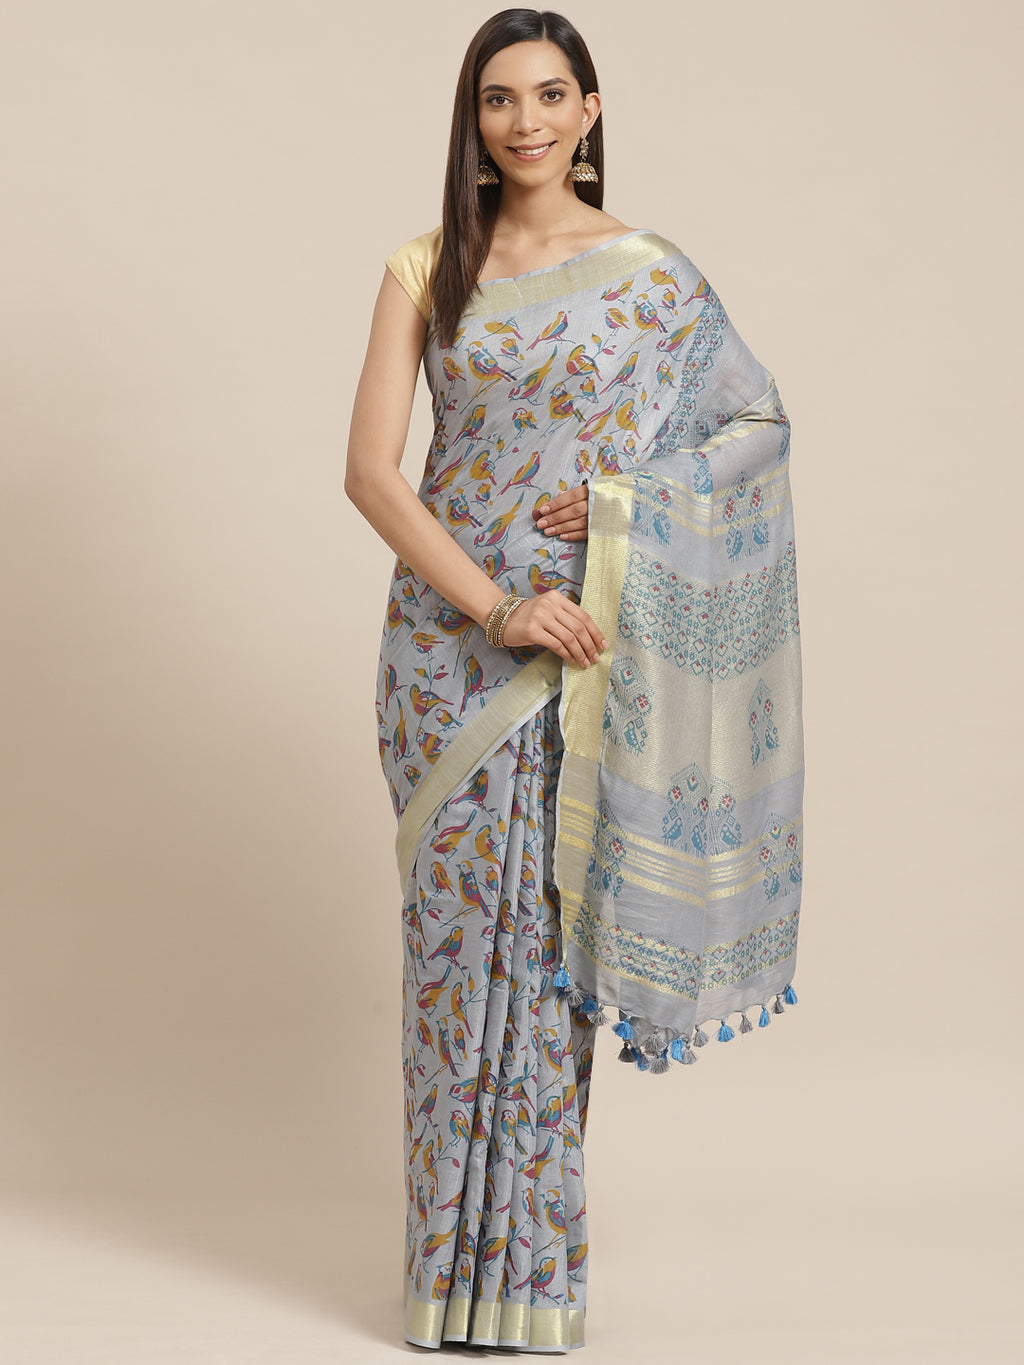 Grey and Blue, Kalakari India Linen Handwoven Saree and Blouse ALBGSA0091-Saree-Kalakari India-ALBGSA0091-Cotton, Geographical Indication, Hand Crafted, Heritage Prints, Linen, Natural Dyes, Red, Sarees, Shibori, Sustainable Fabrics, Woven, Yellow-[Linen,Ethnic,wear,Fashionista,Handloom,Handicraft,Indigo,blockprint,block,print,Cotton,Chanderi,Blue, latest,classy,party,bollywood,trendy,summer,style,traditional,formal,elegant,unique,style,hand,block,print, dabu,booti,gift,present,glamorous,afforda